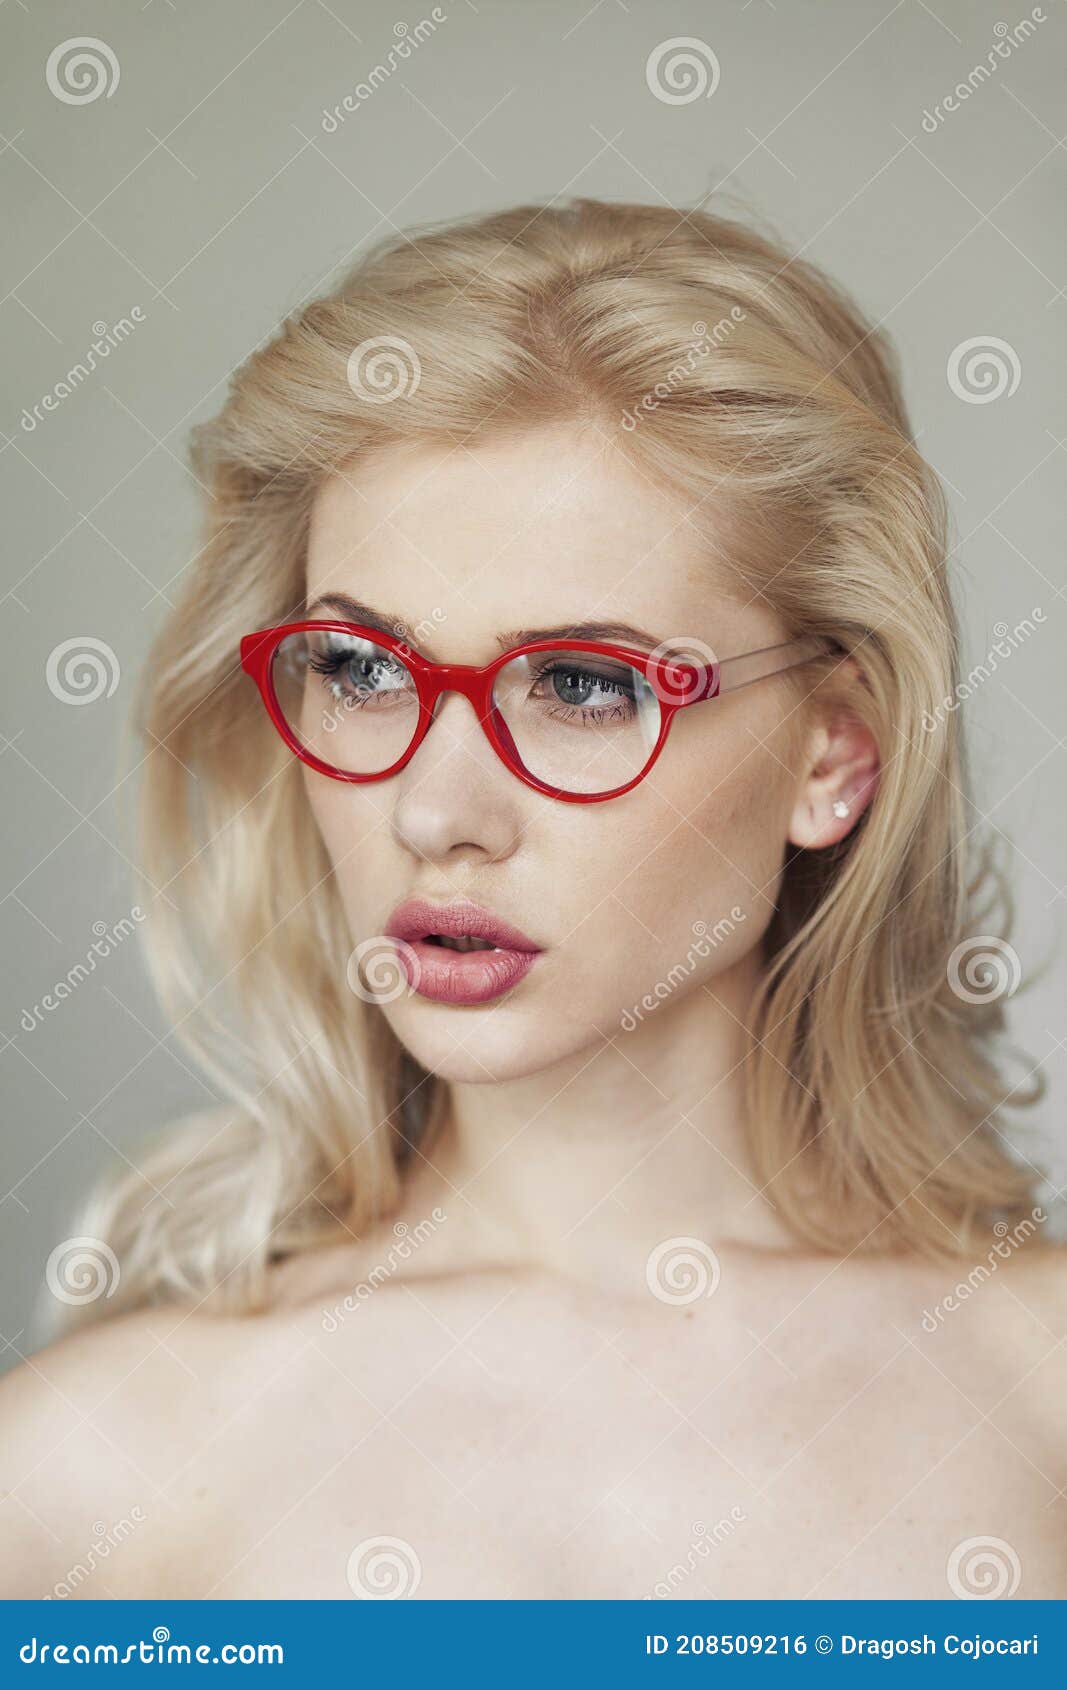 Closeup Portrait Of A Blonde Woman With Makeup Wearing Red Eyeglasses